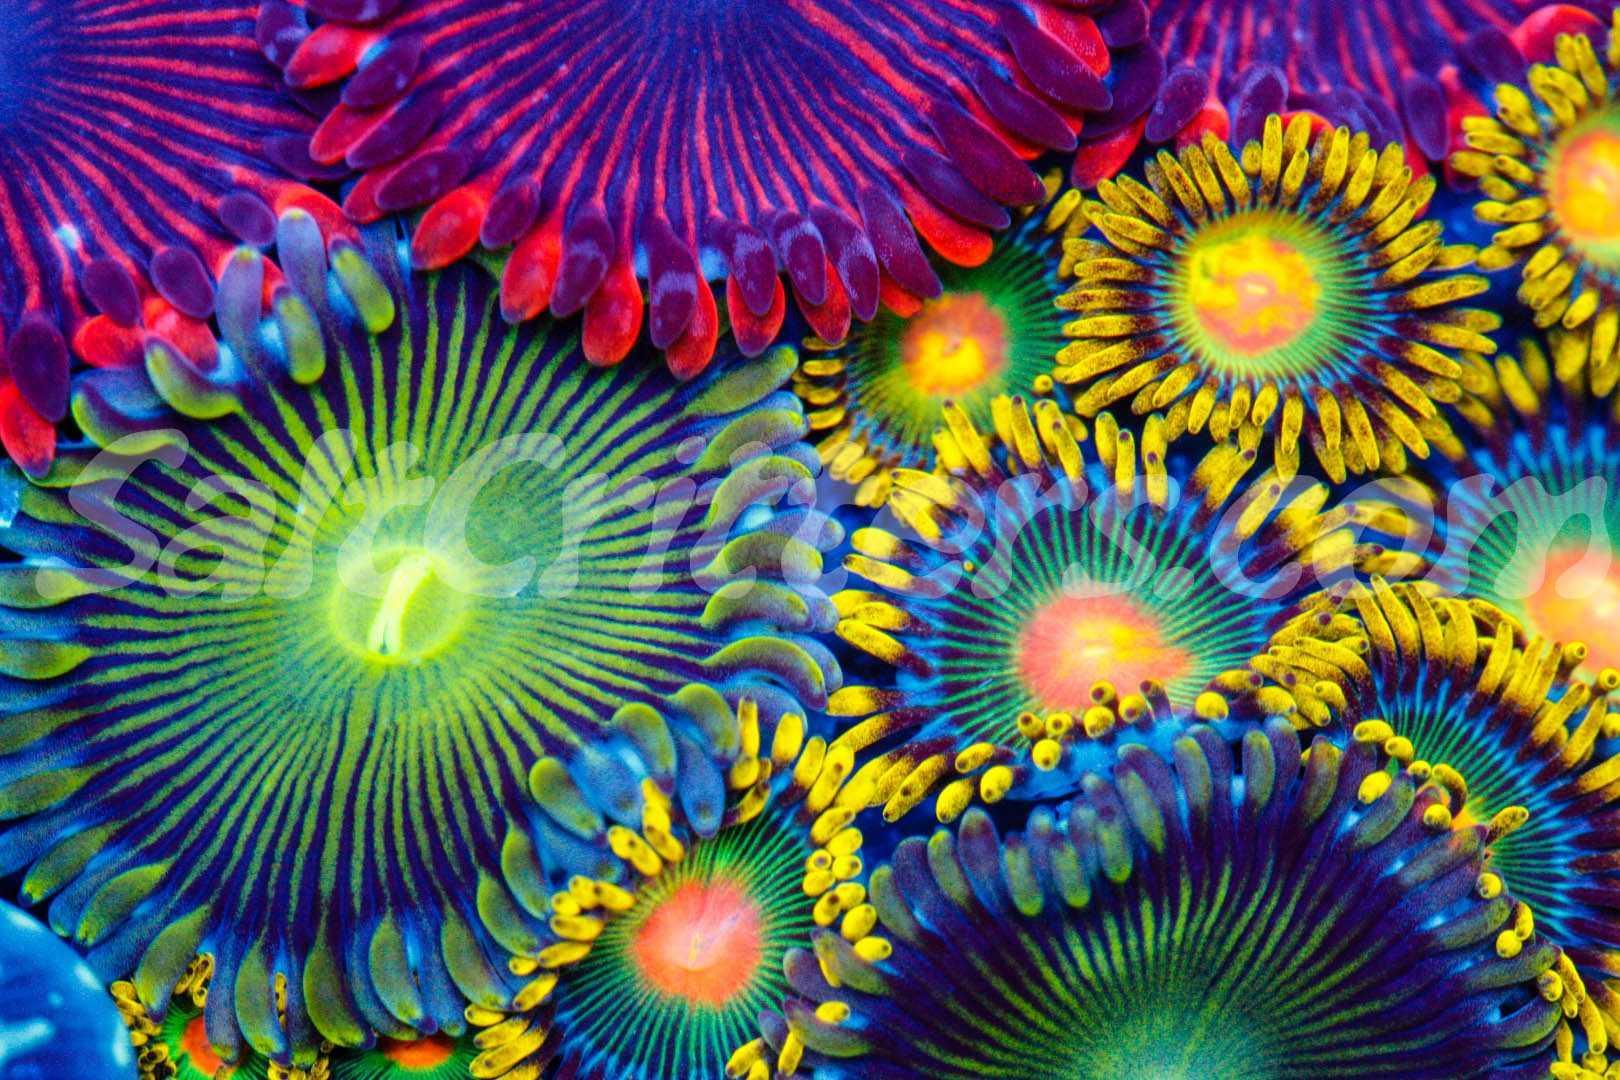 Zoanthid and Palythoa both Beautiful and Built to Survive - SaltCritters